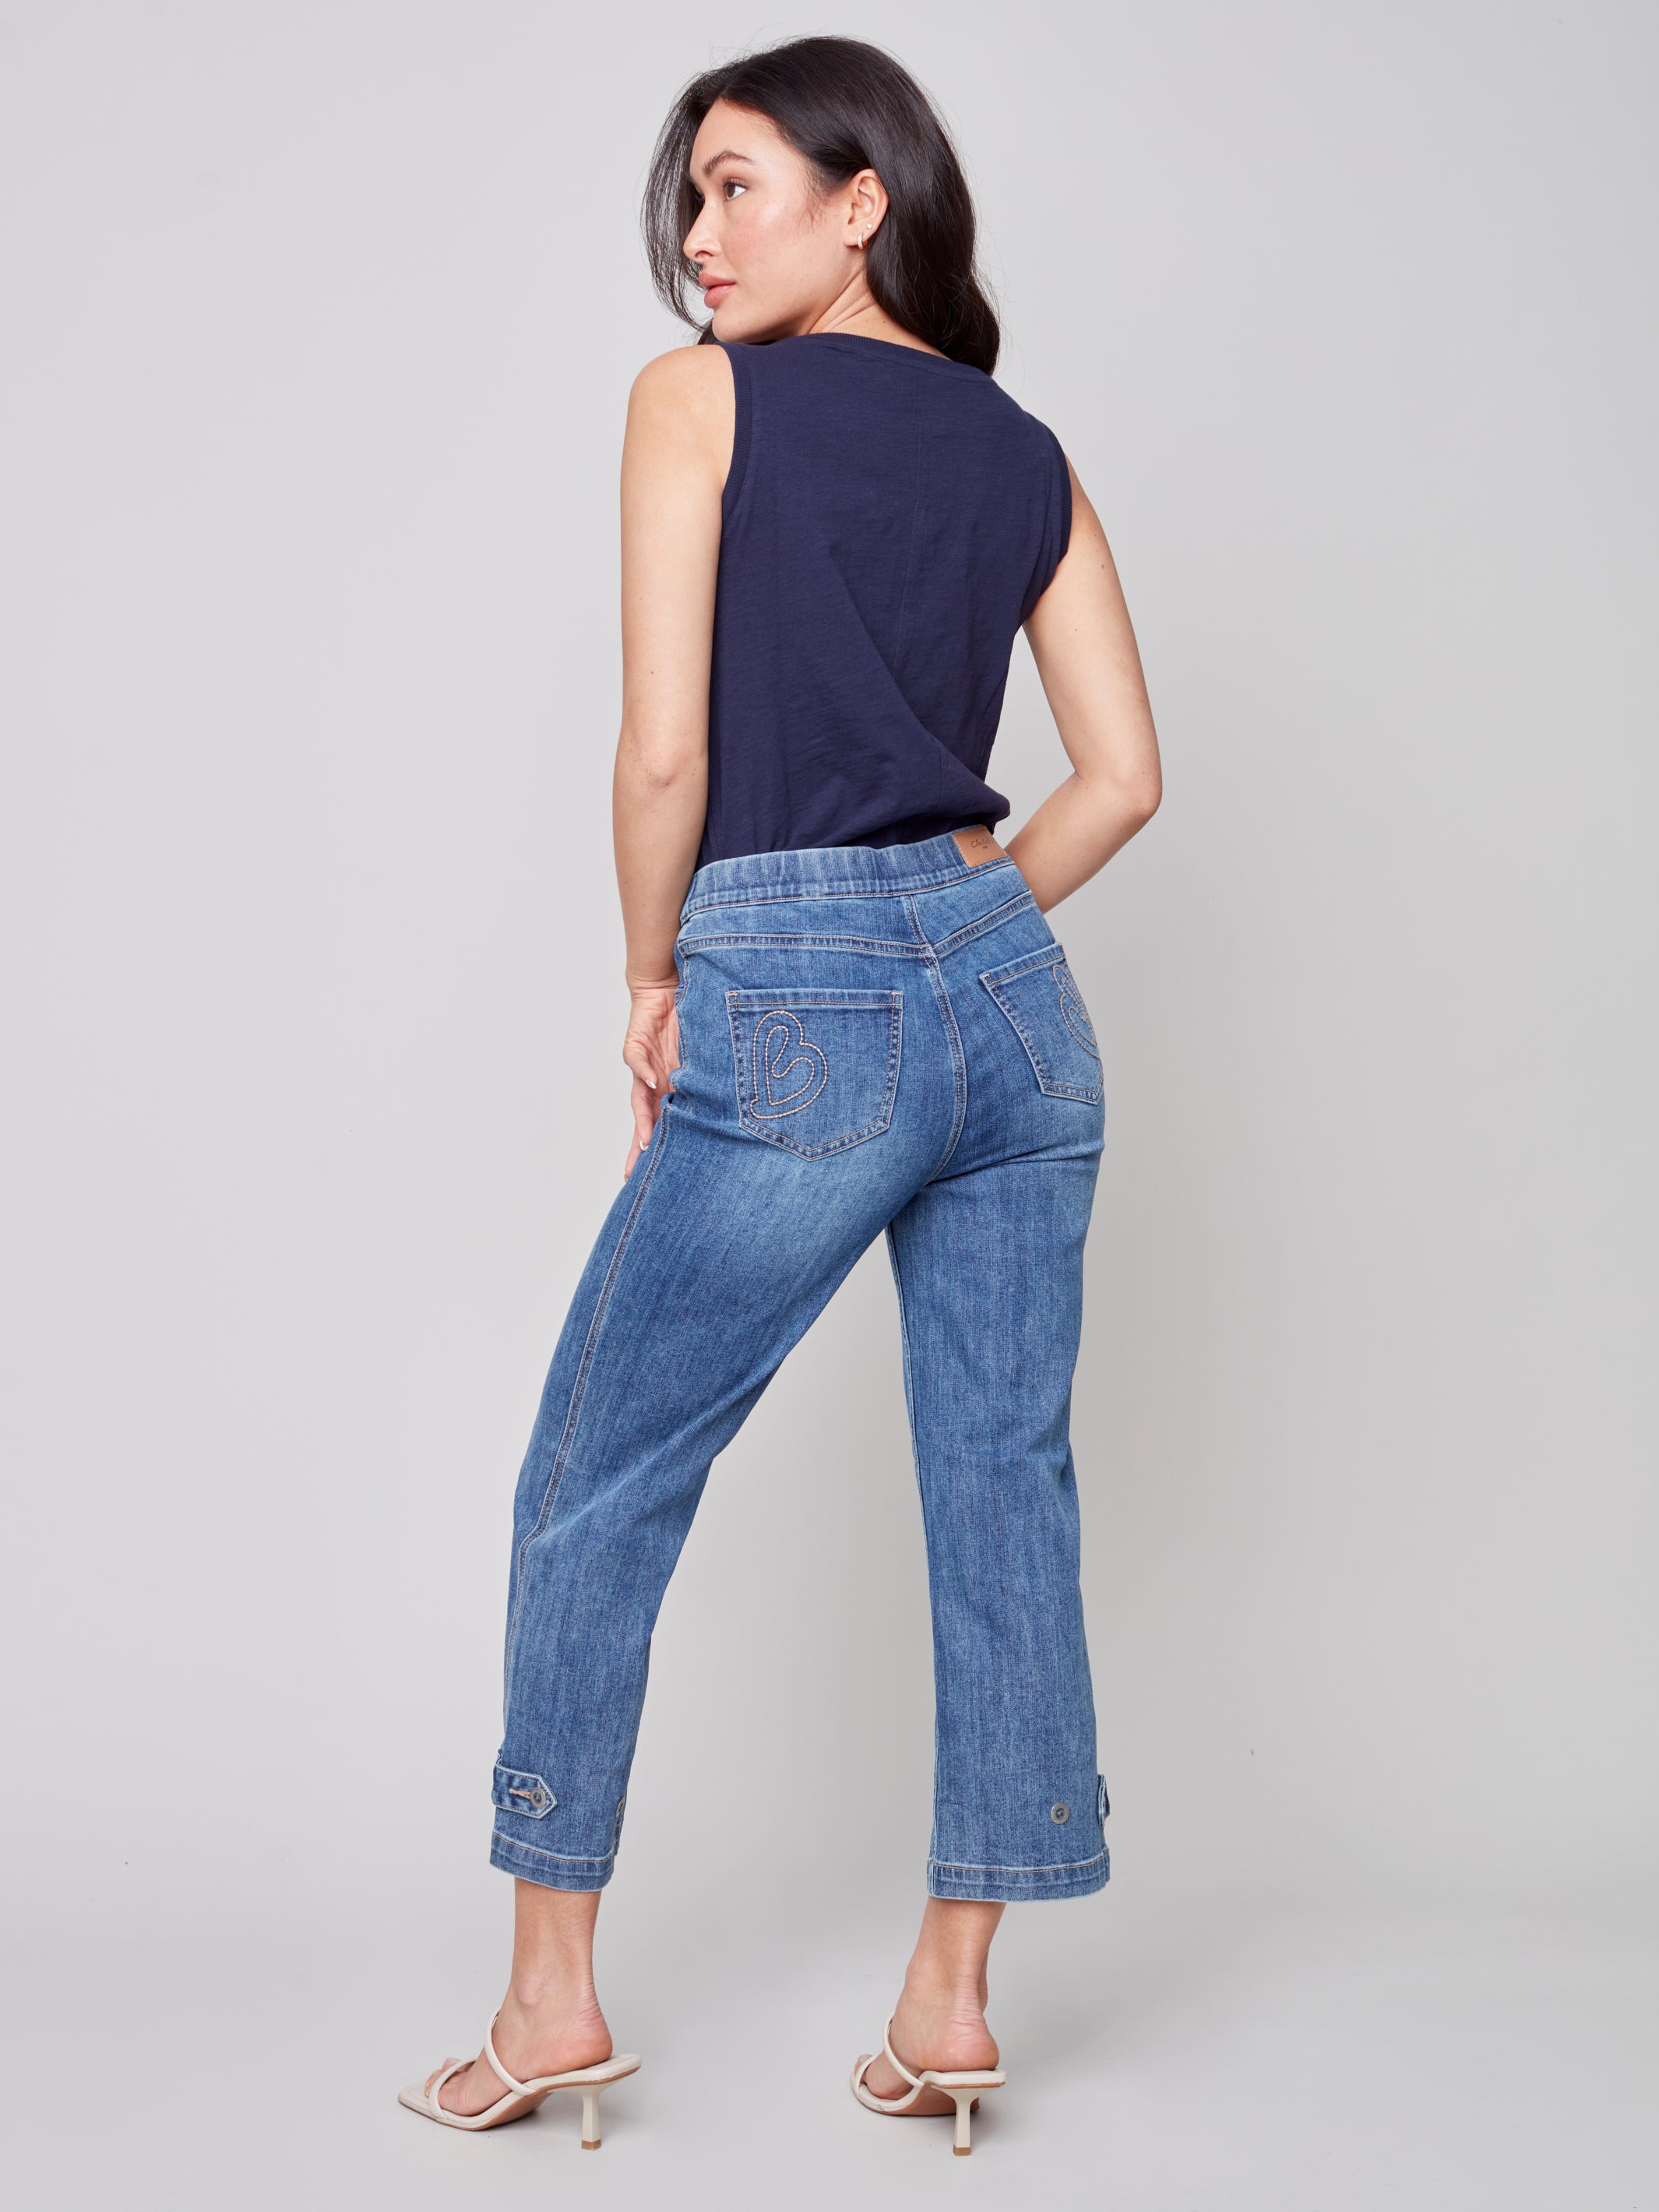 Pull On Denim Ankle Pant with Hem Button Detail by Charlie B